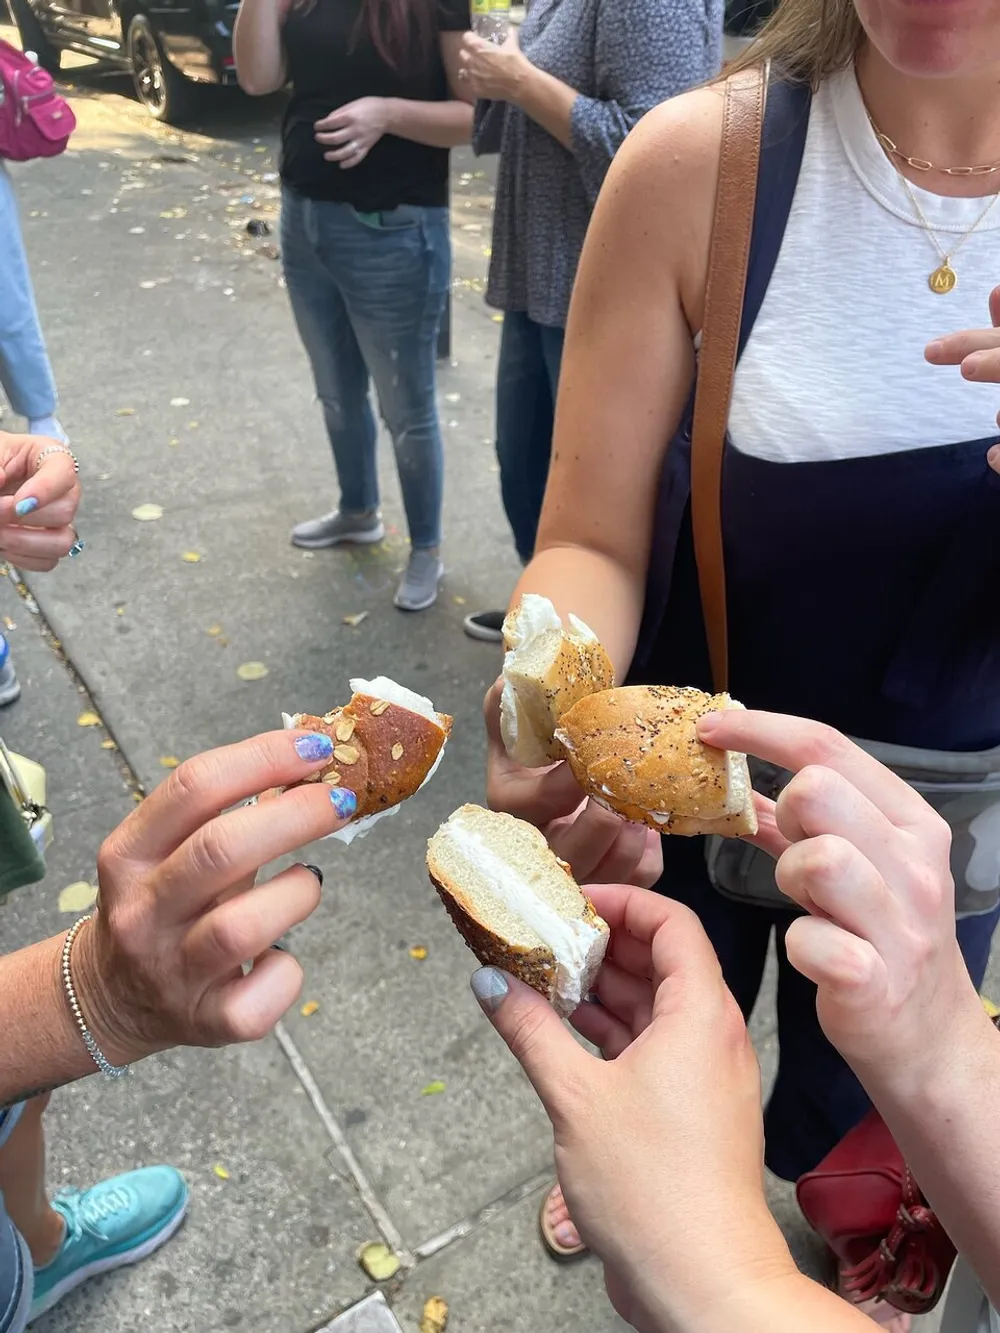 A group of people are holding and presumably sharing different varieties of bagel sandwiches outdoors